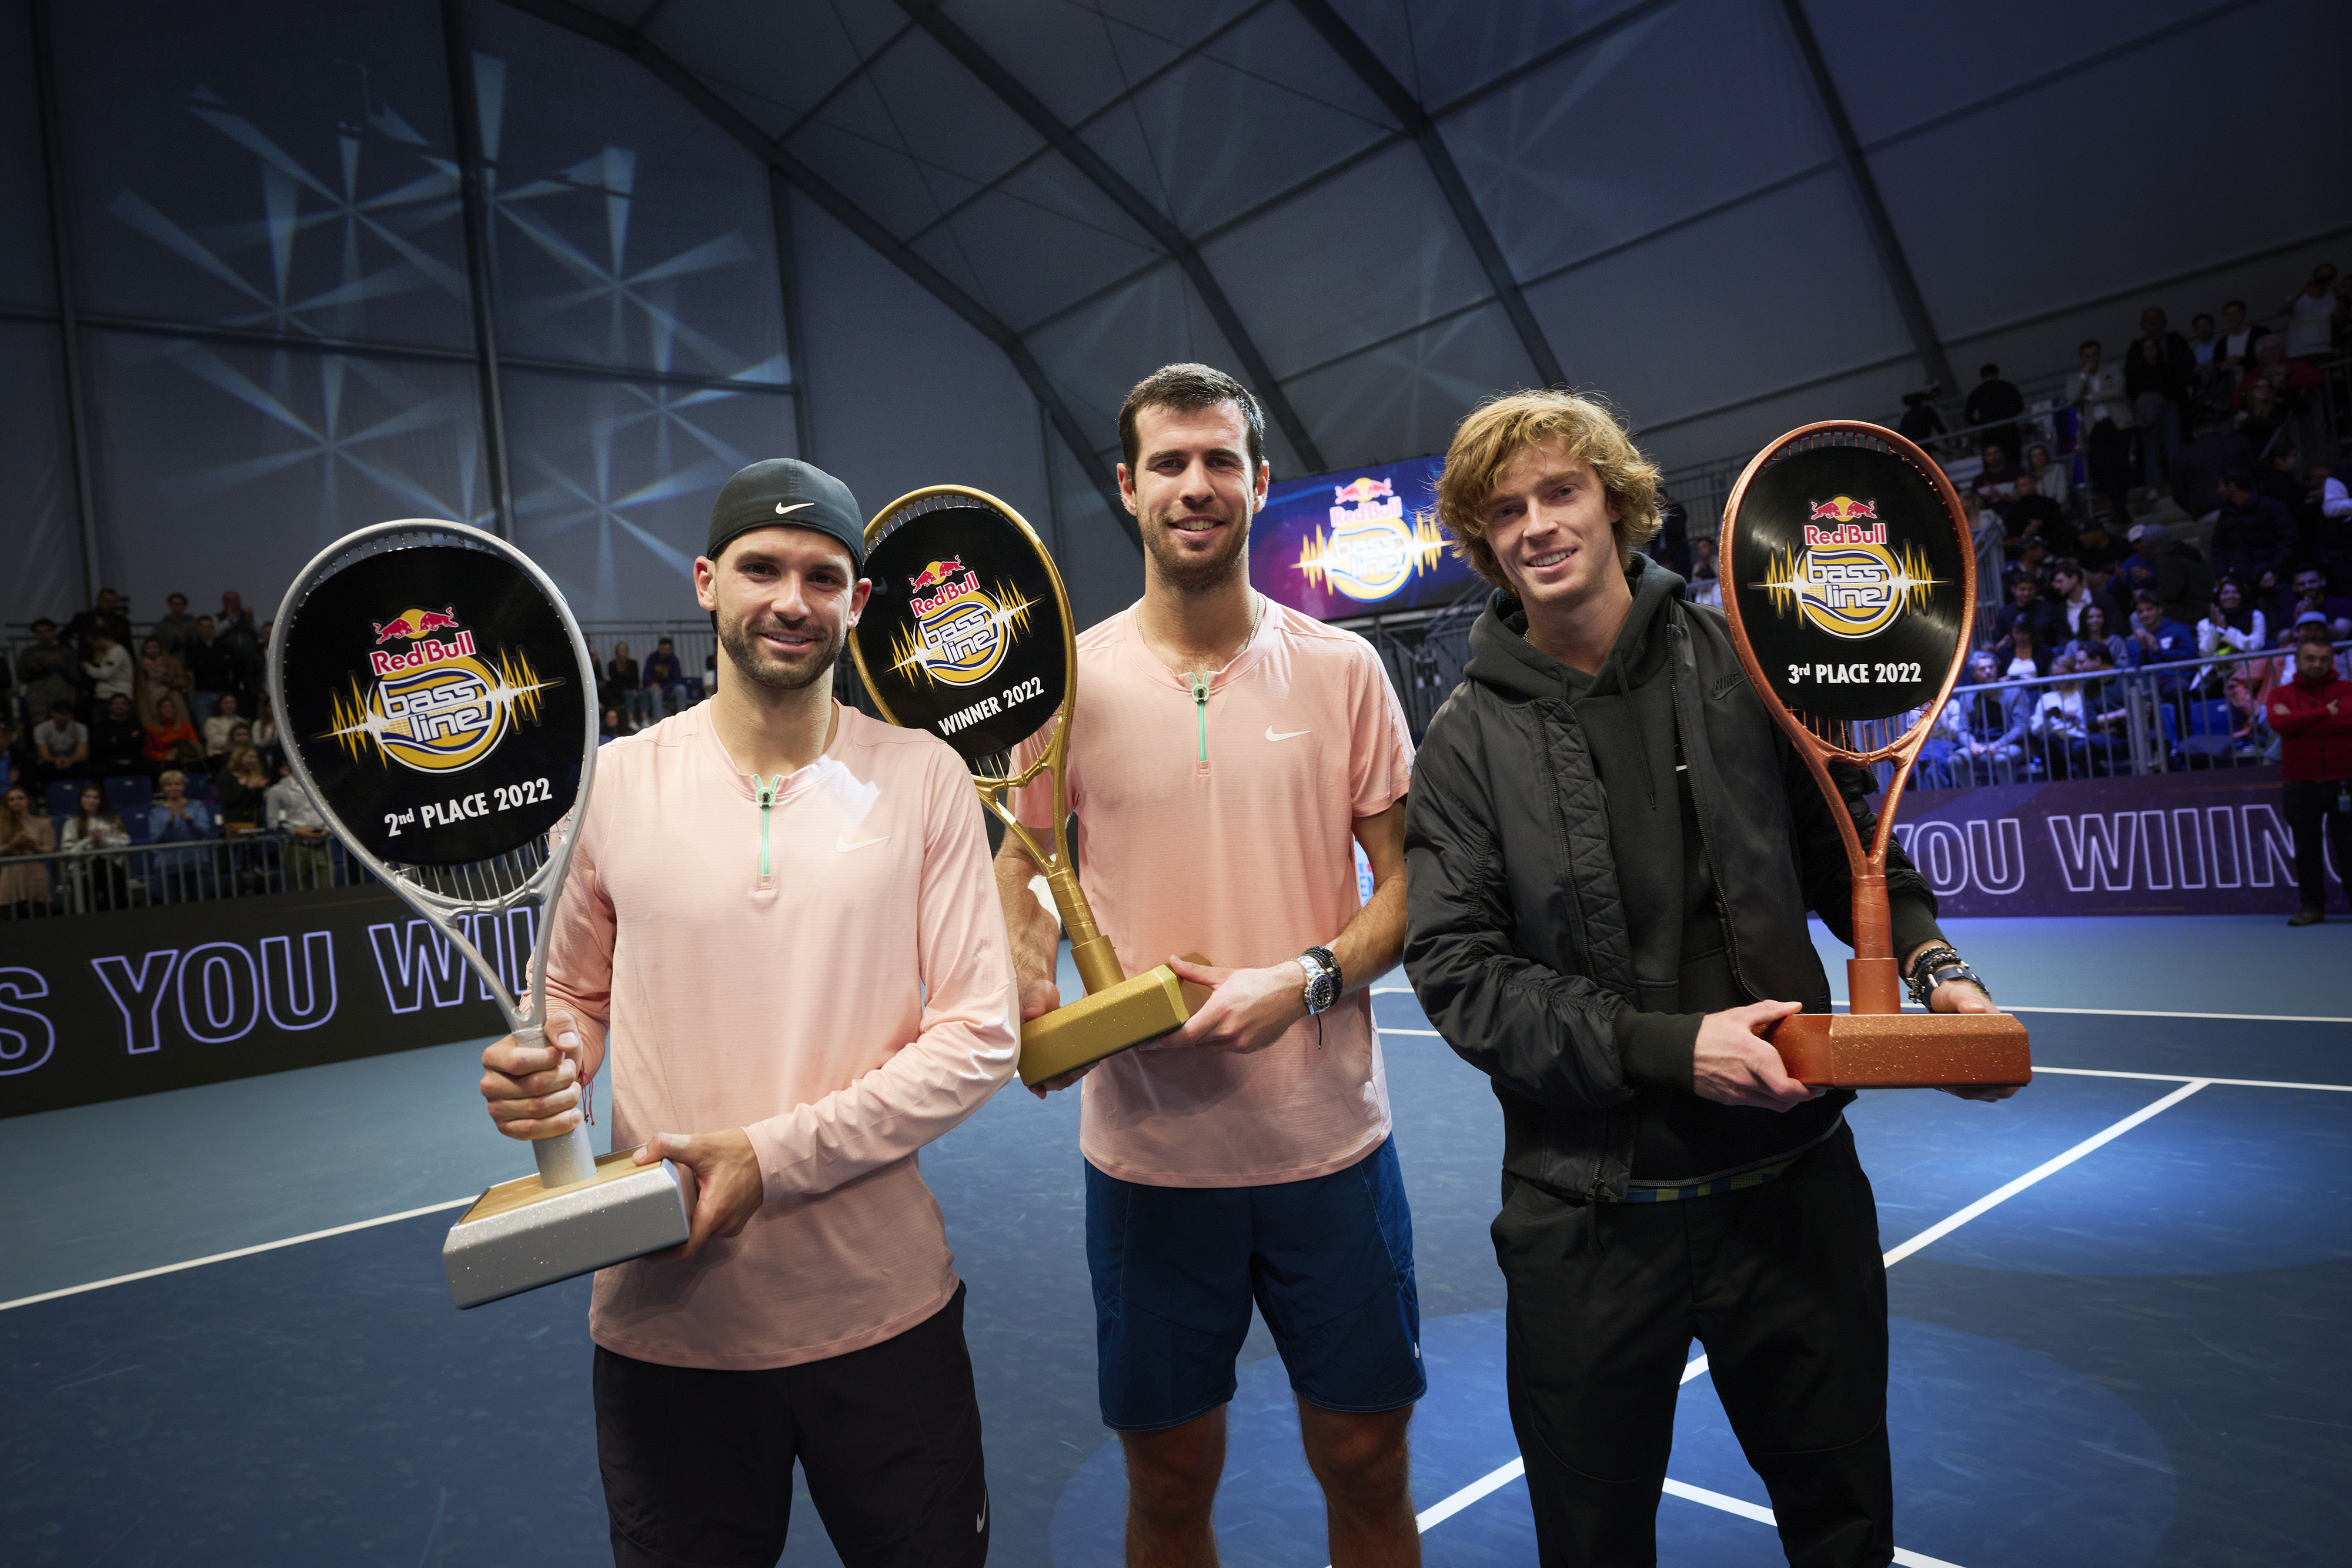 PHOTOS Andrey Rublev, Taylor Fritz warm up for Vienna with Red Bull exhibition event